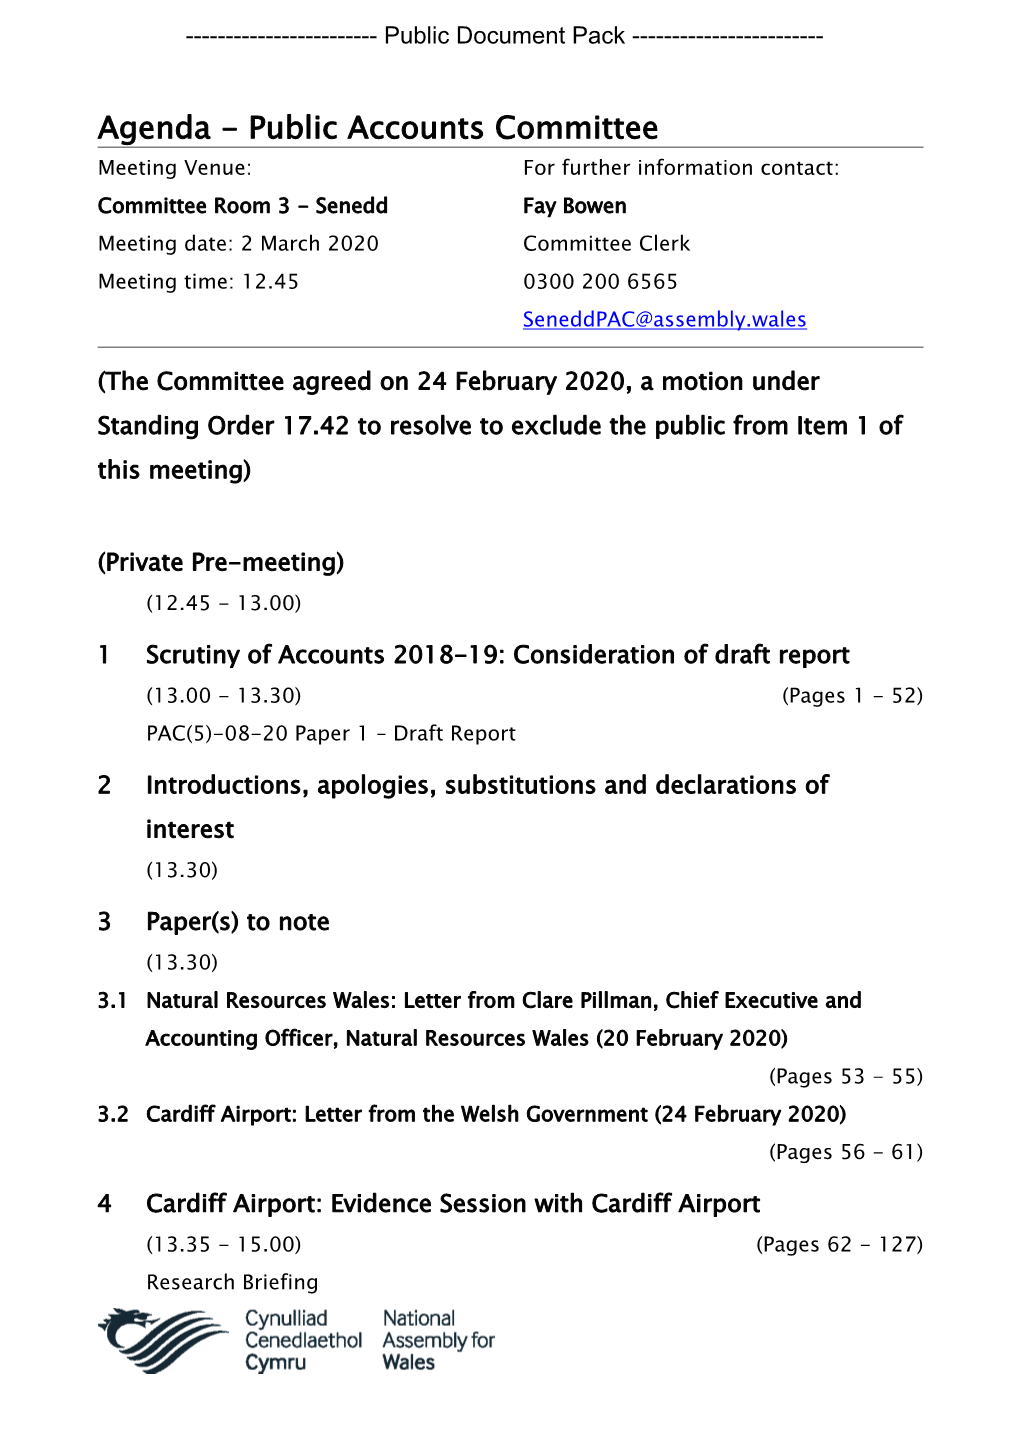 (Public Pack)Agenda Document for Public Accounts Committee, 02/03